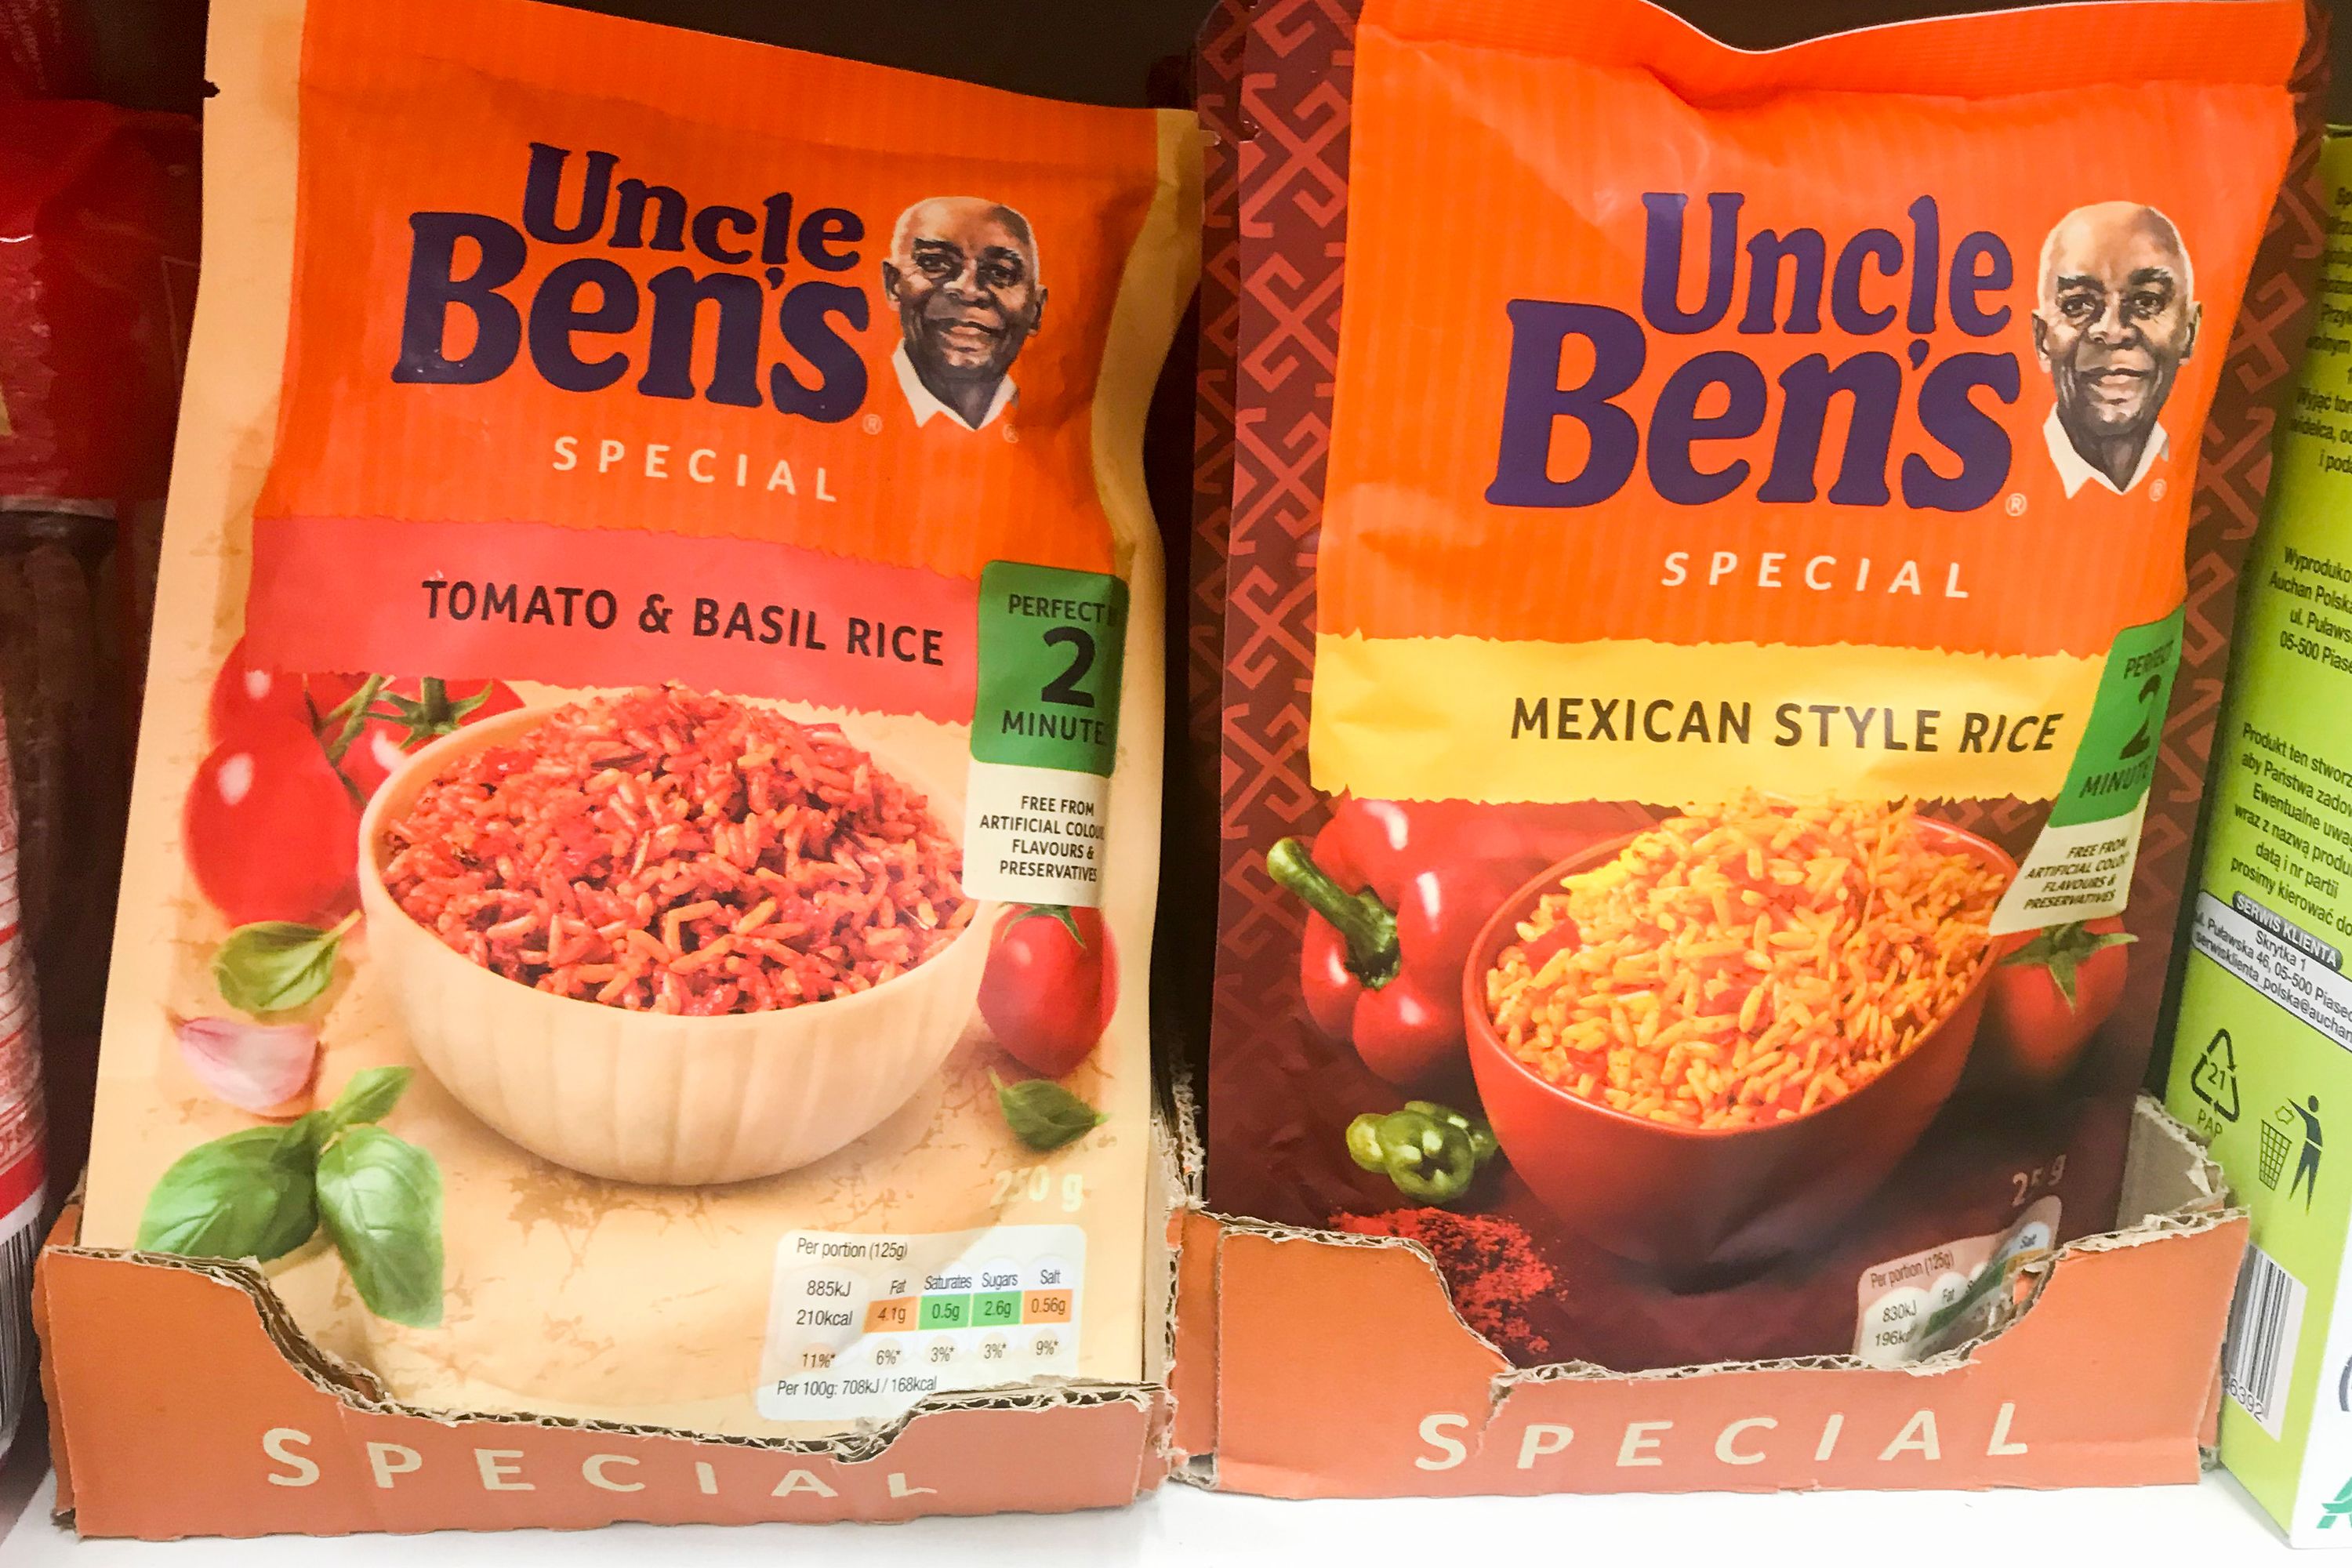 Uncle Ben's and Mrs. Butterworth's follow Aunt Jemima in move to phase out  racial stereotypes in logos